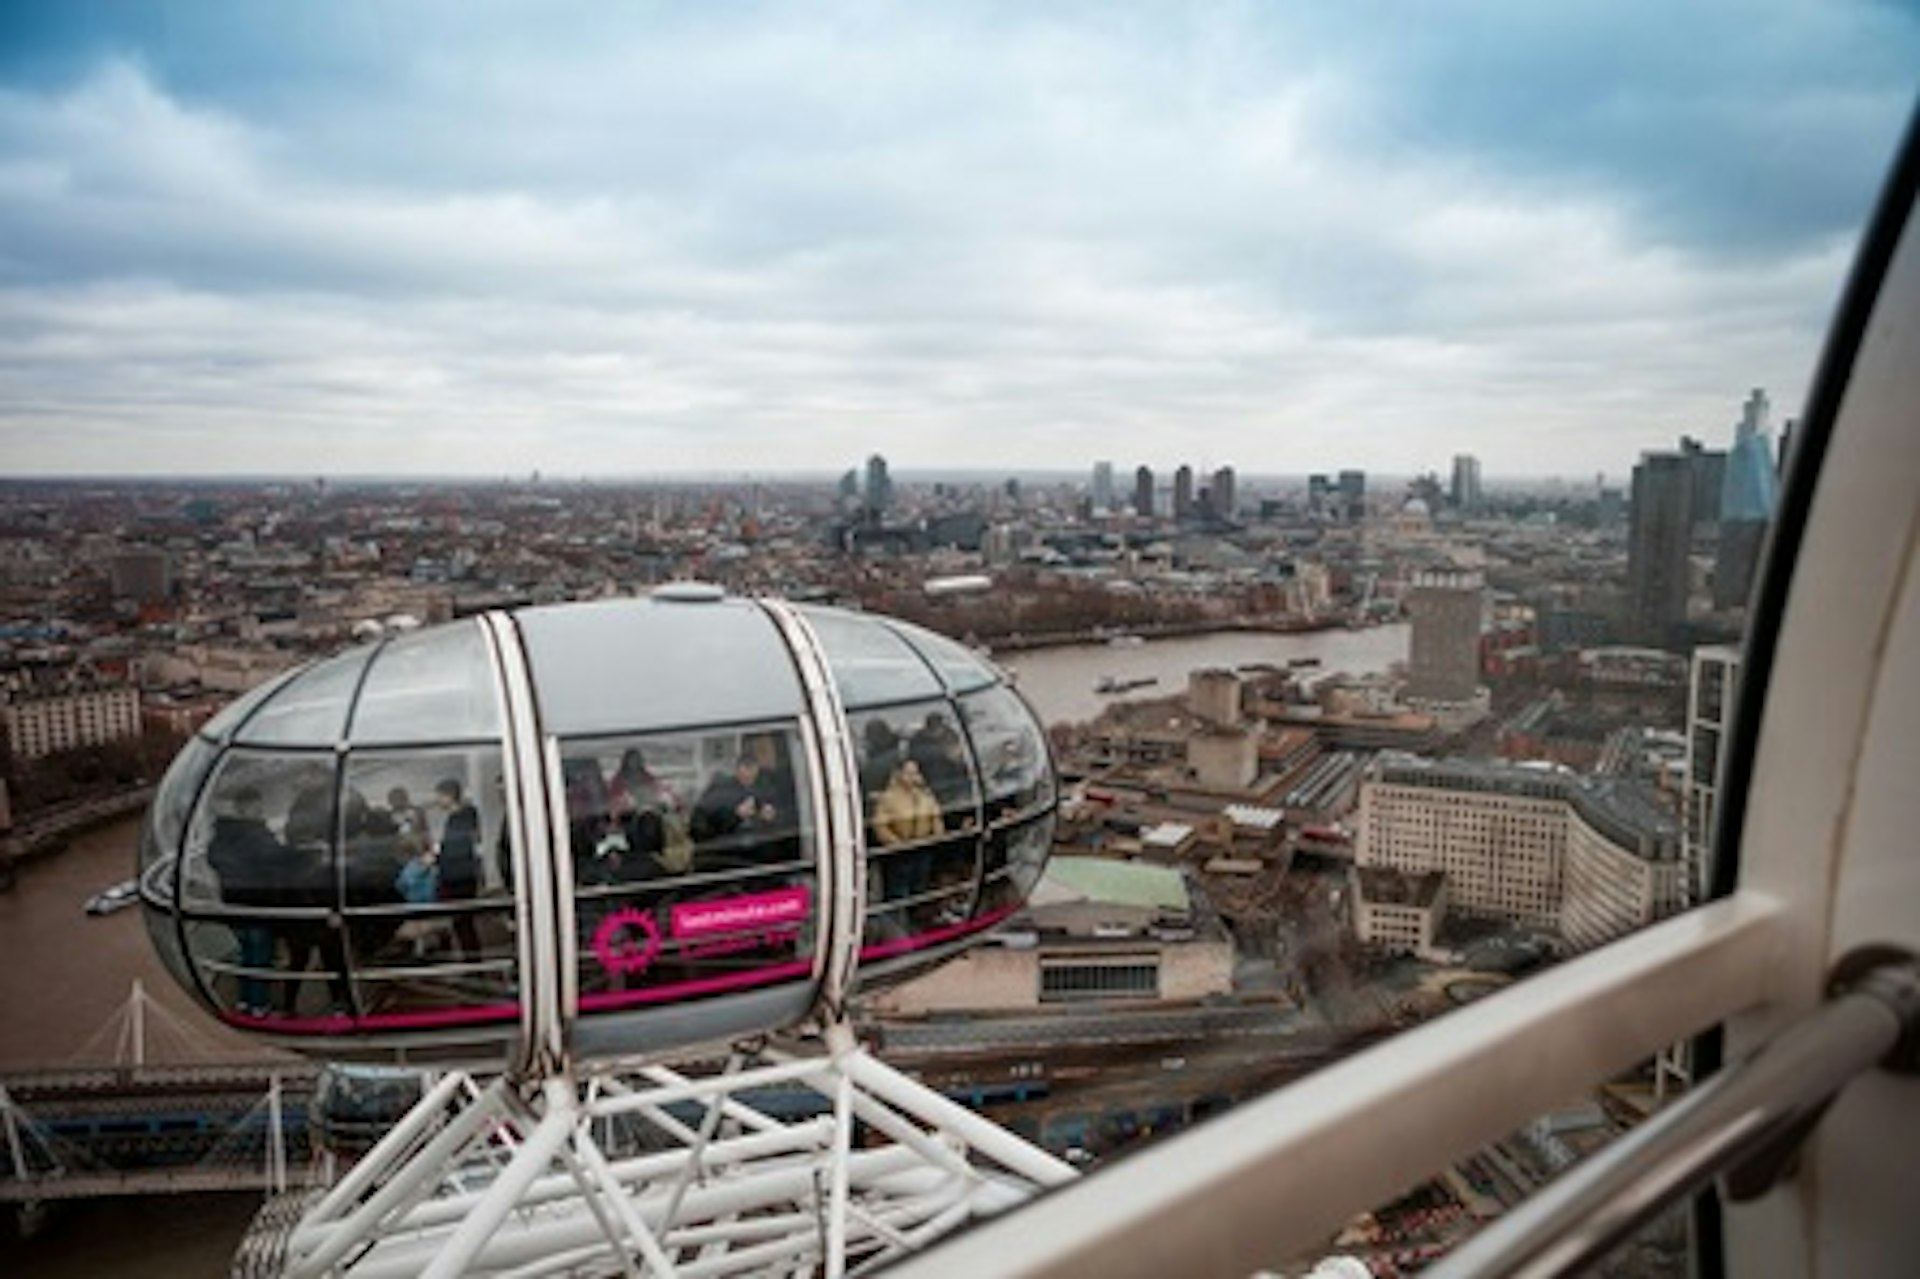 Visit to Lastminute.com London Eye with London Eye River Cruise - Two Adults and Two Children 4